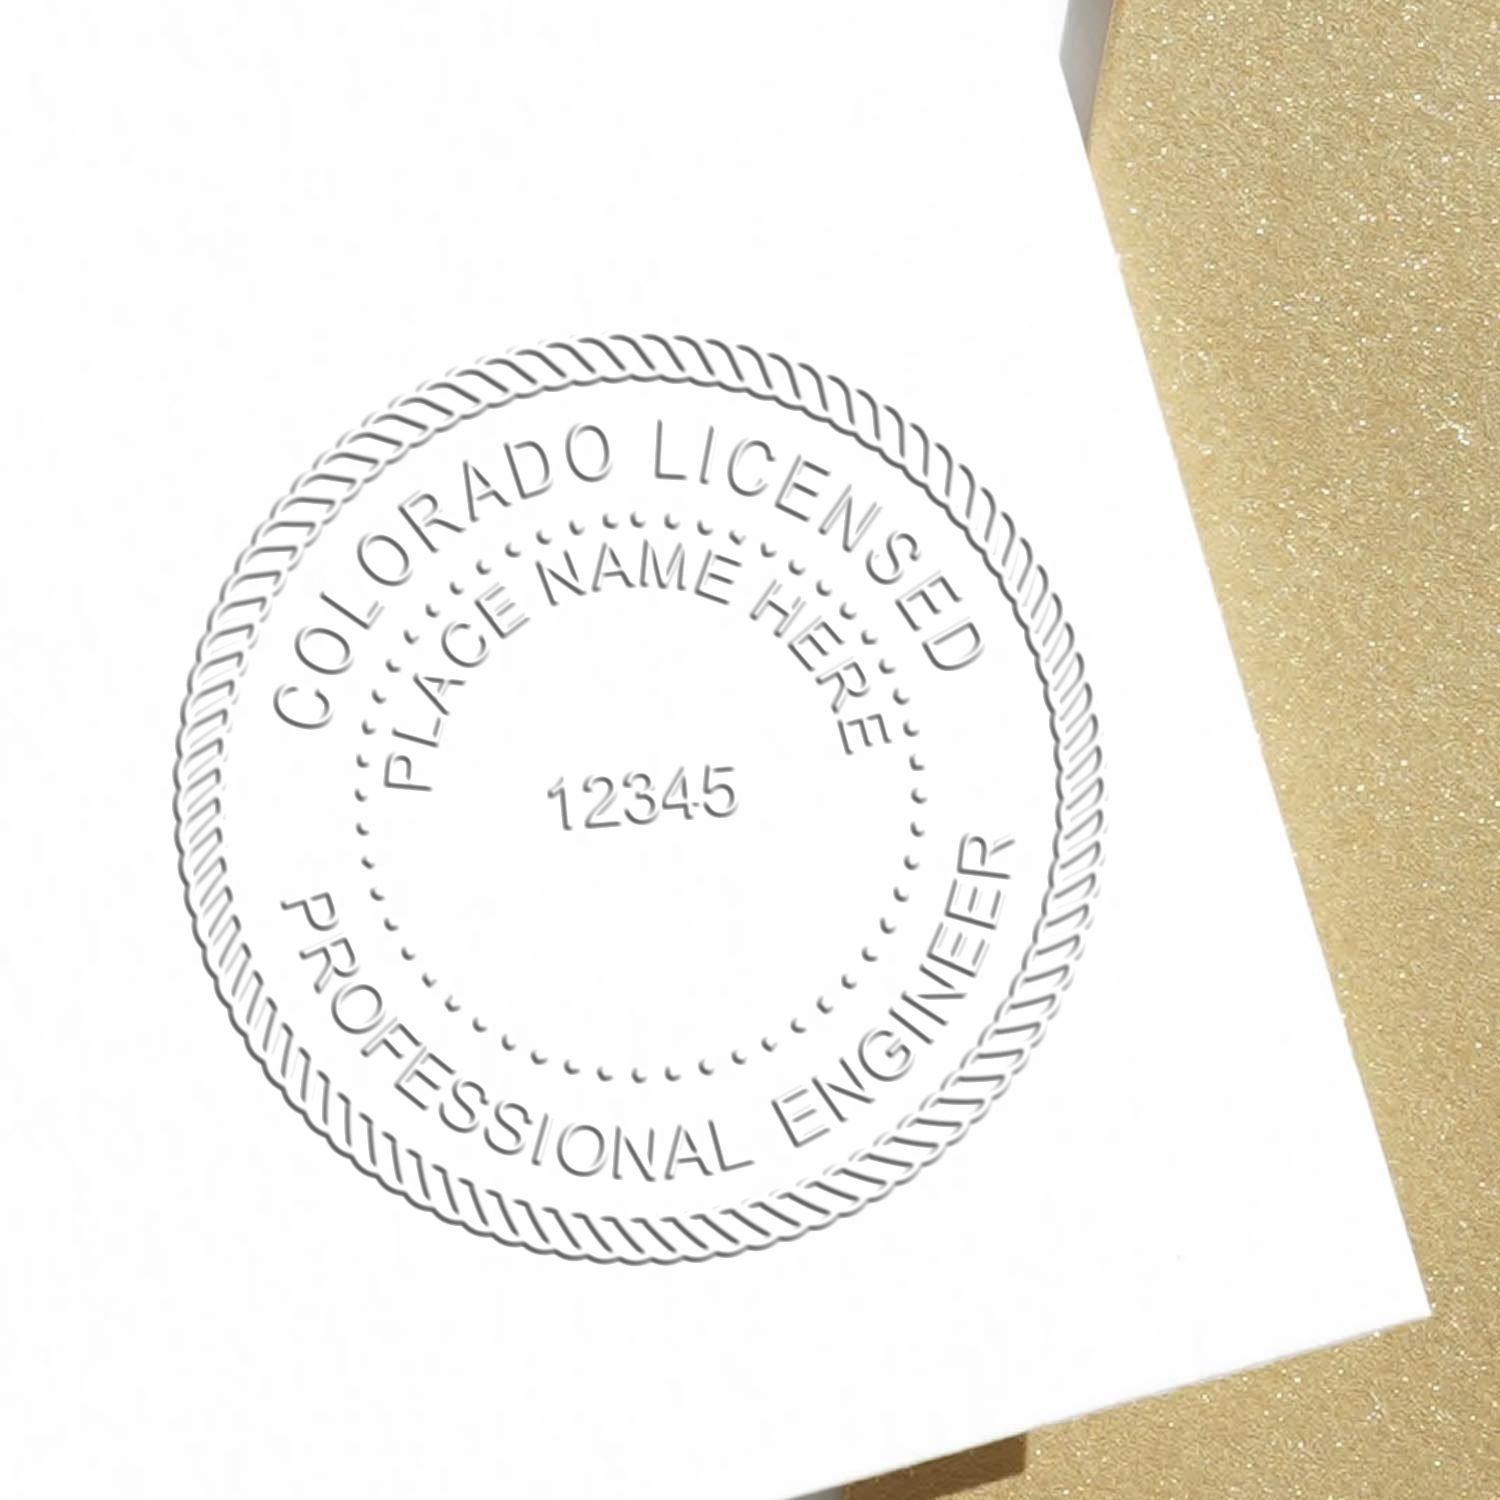 An alternative view of the State of Colorado Extended Long Reach Engineer Seal stamped on a sheet of paper showing the image in use